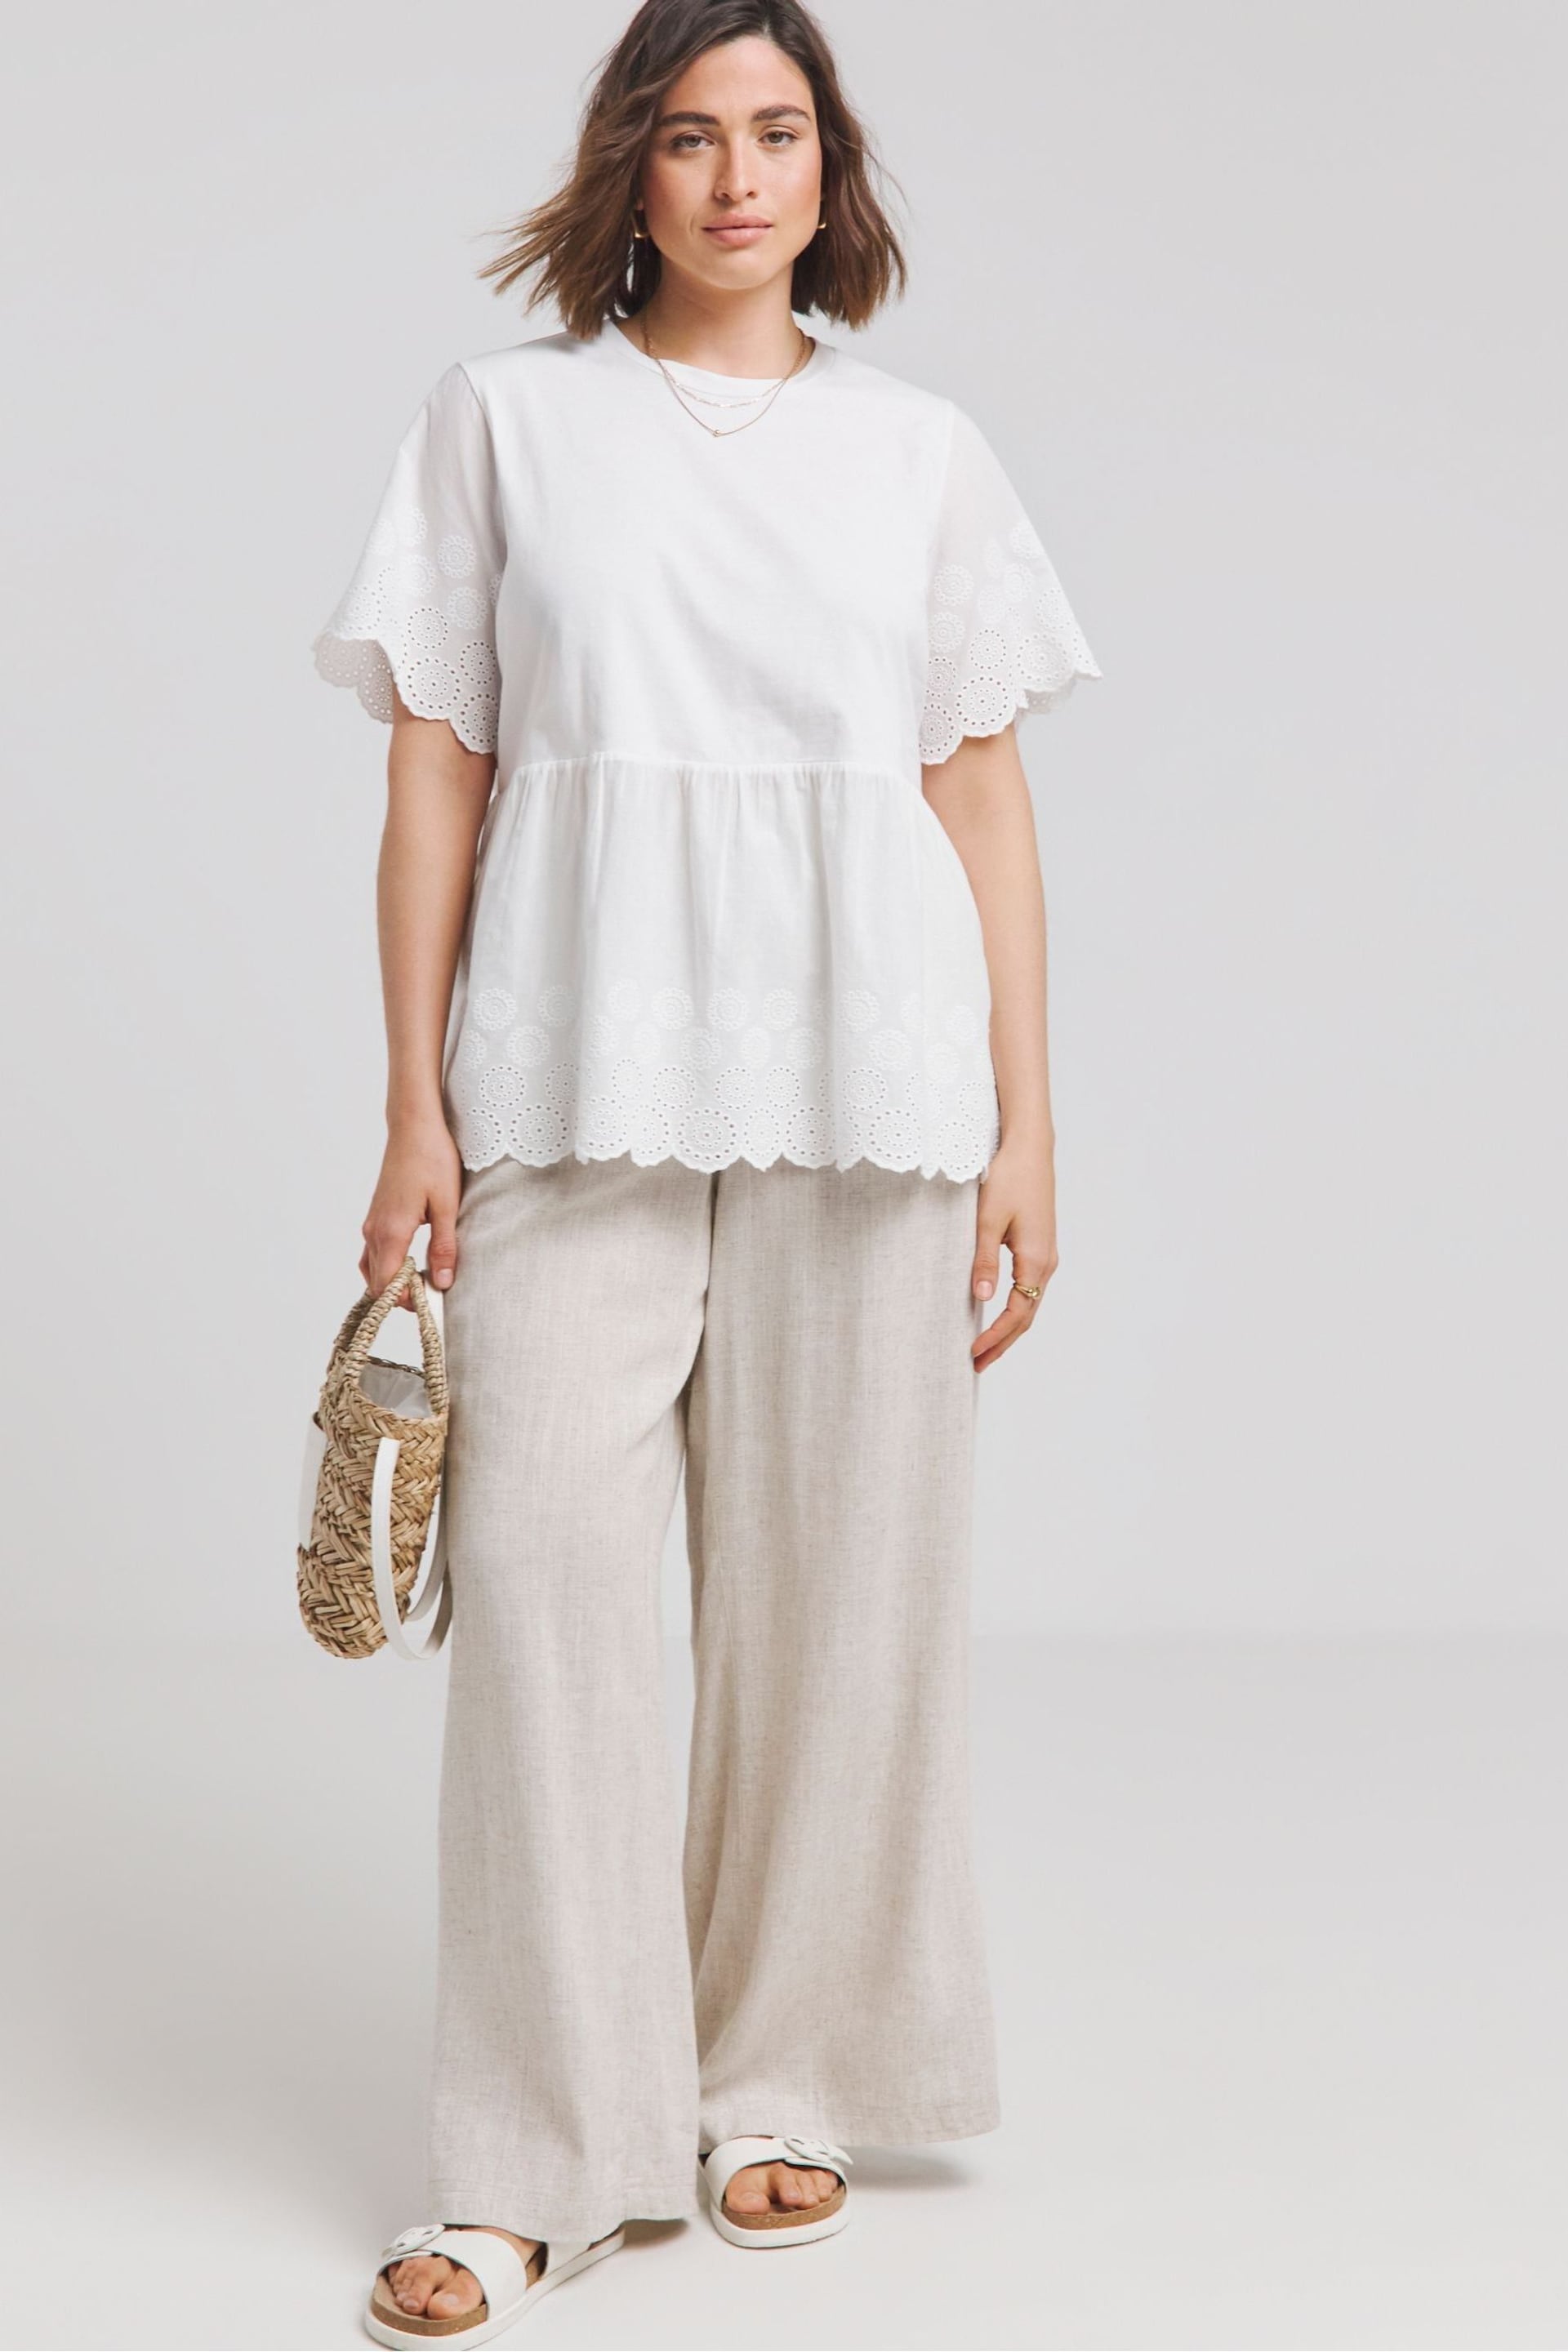 Simply Be White Broderie Smock Blouse - Image 3 of 4